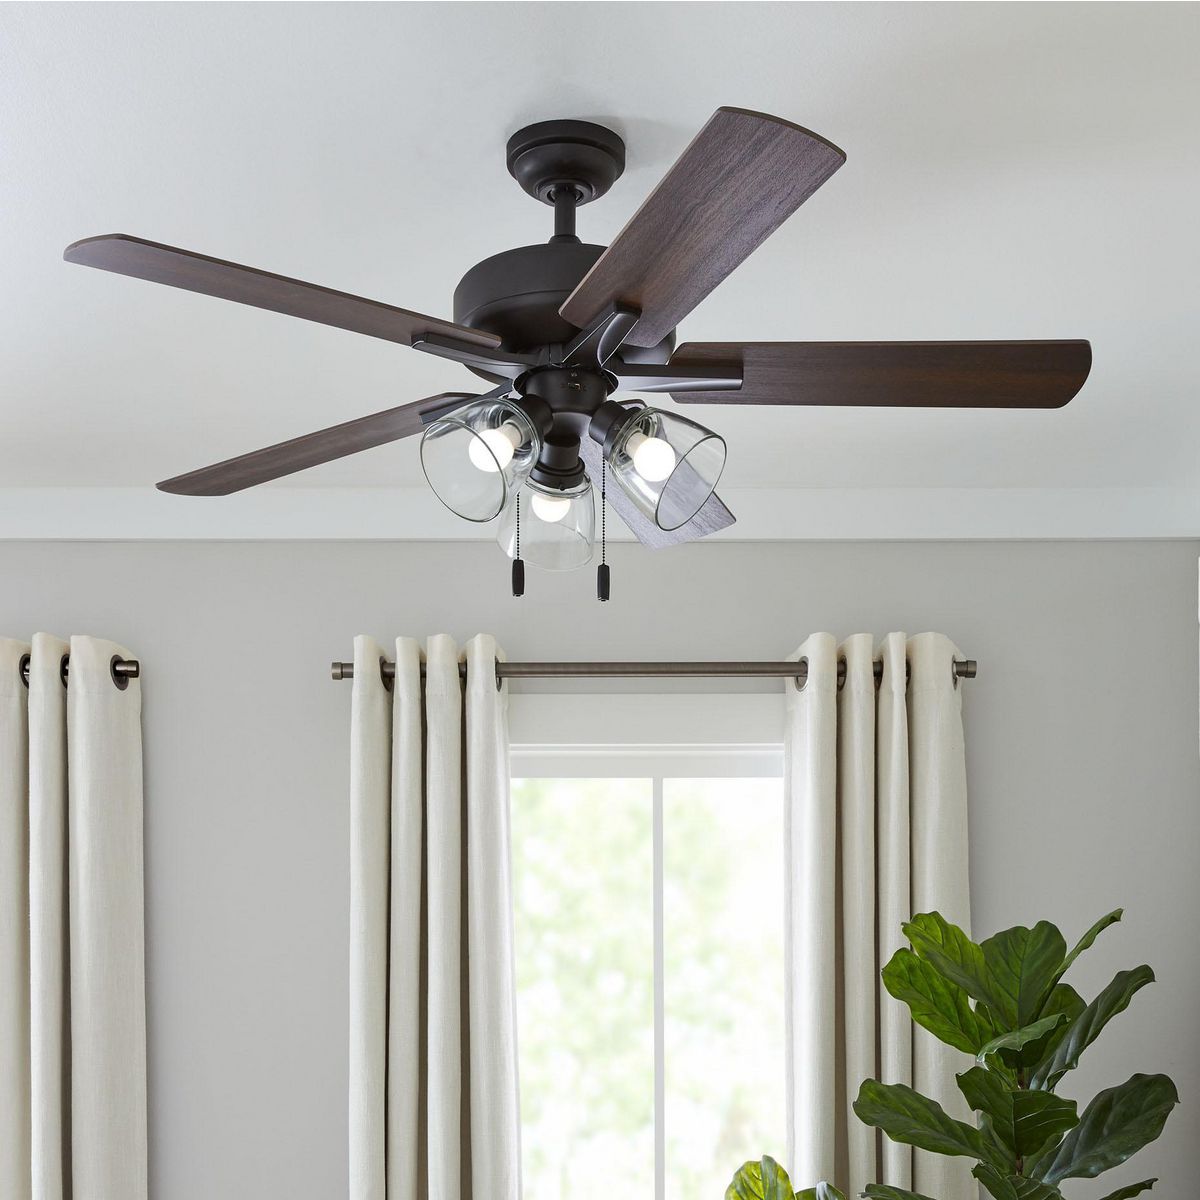 Better Homes & Gardens 52" Bronze Coastal Ceiling Fan, 5 Reversible Blade, 3 LED Bulbs Included - image 4 of 10